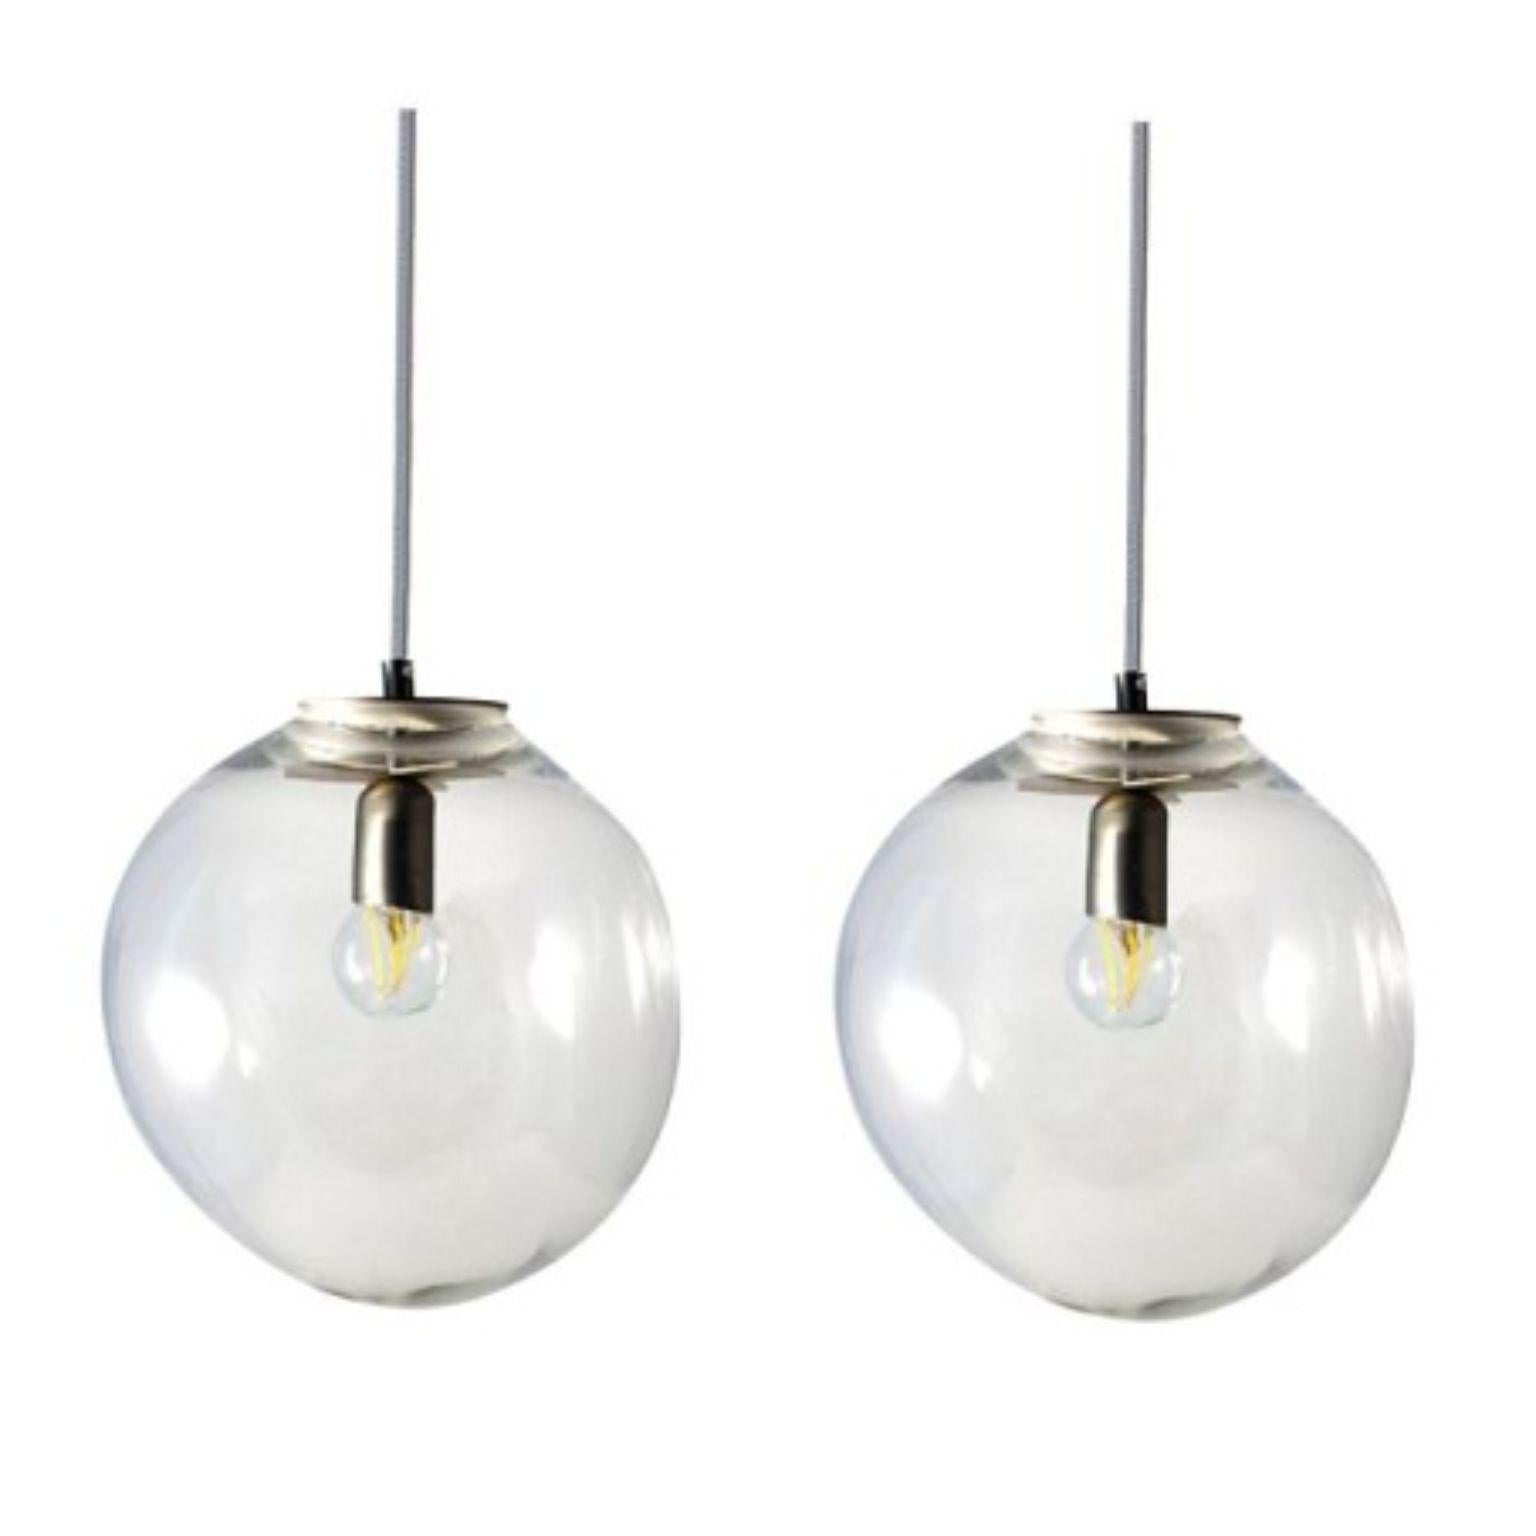 Set of 2 Planetoide Juno Crystal pendants by Eloa.
No UL listed 
Material: Glass, steel, silver, LED Bulb
Dimensions: D30 x W30 x H250 cm
Also Available in different colours and dimensions.

All our lamps can be wired according to each country. If